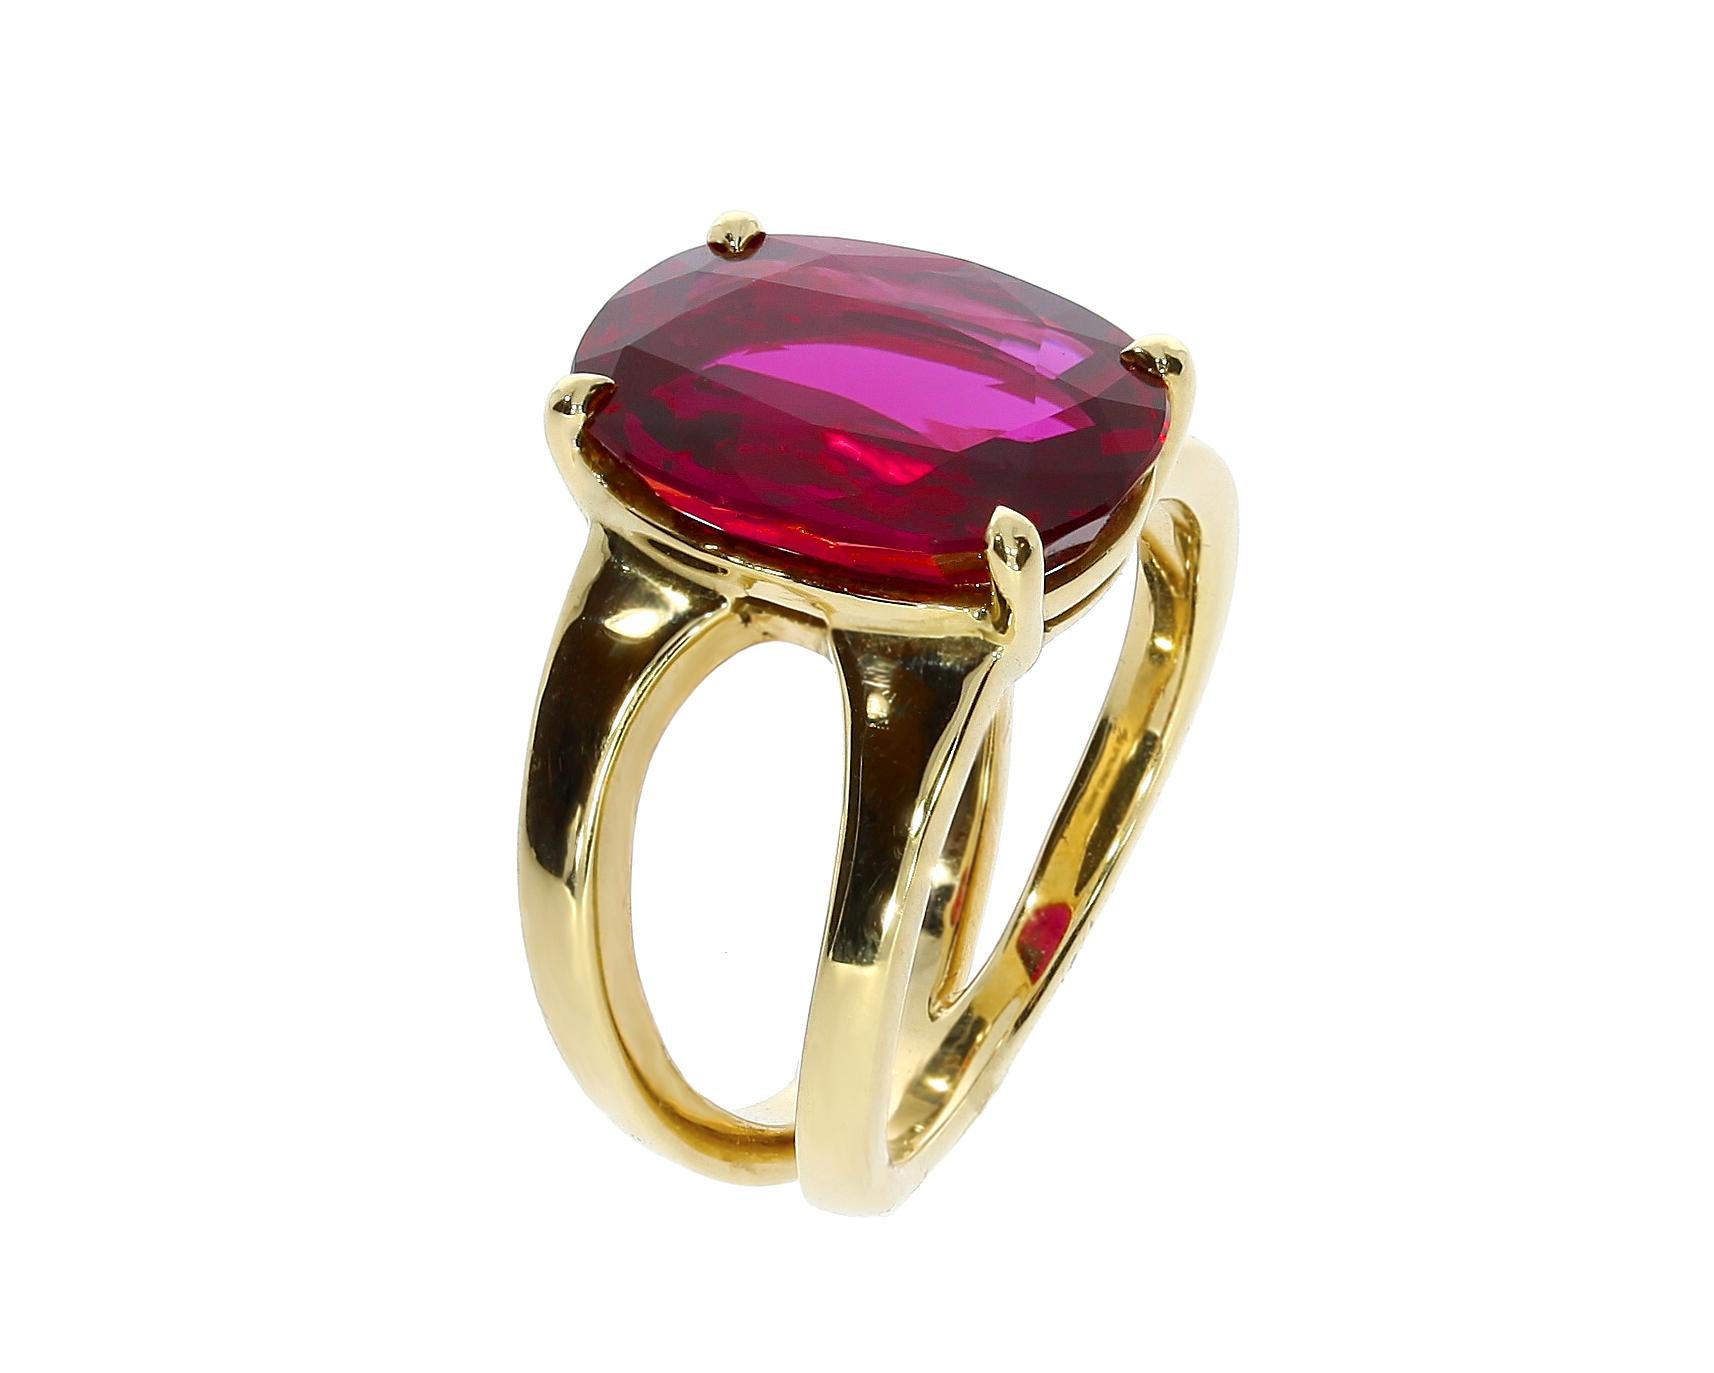 This simple and sleek ring features a stunning 6.79 carat antique cushion Siam Ruby with an 18 carat yellow gold band.  It's timeless design ensures that it can be worn for many years to come and always remain in-style. Will make the perfect